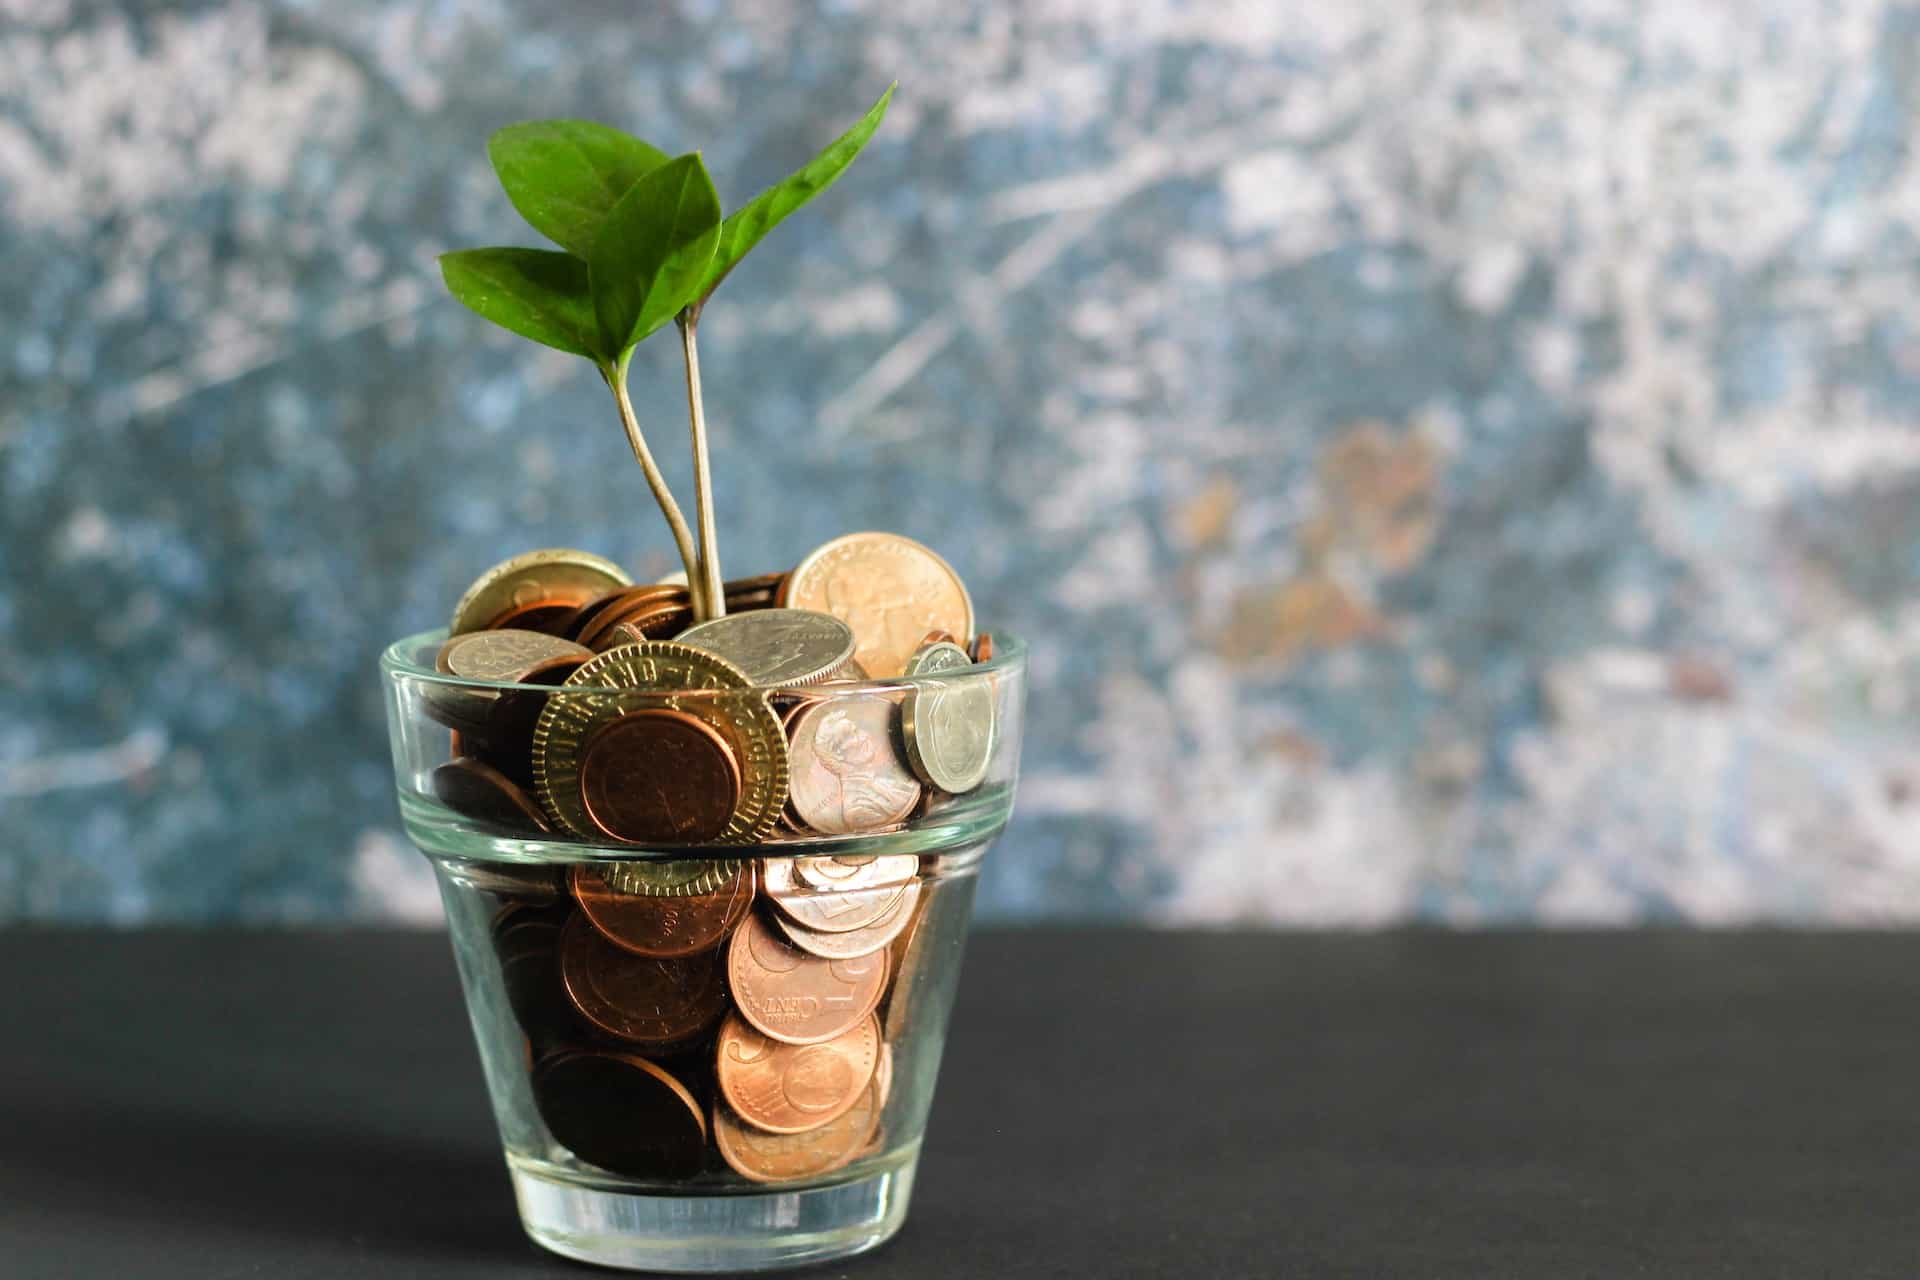 A plant growing in a glass of coins.